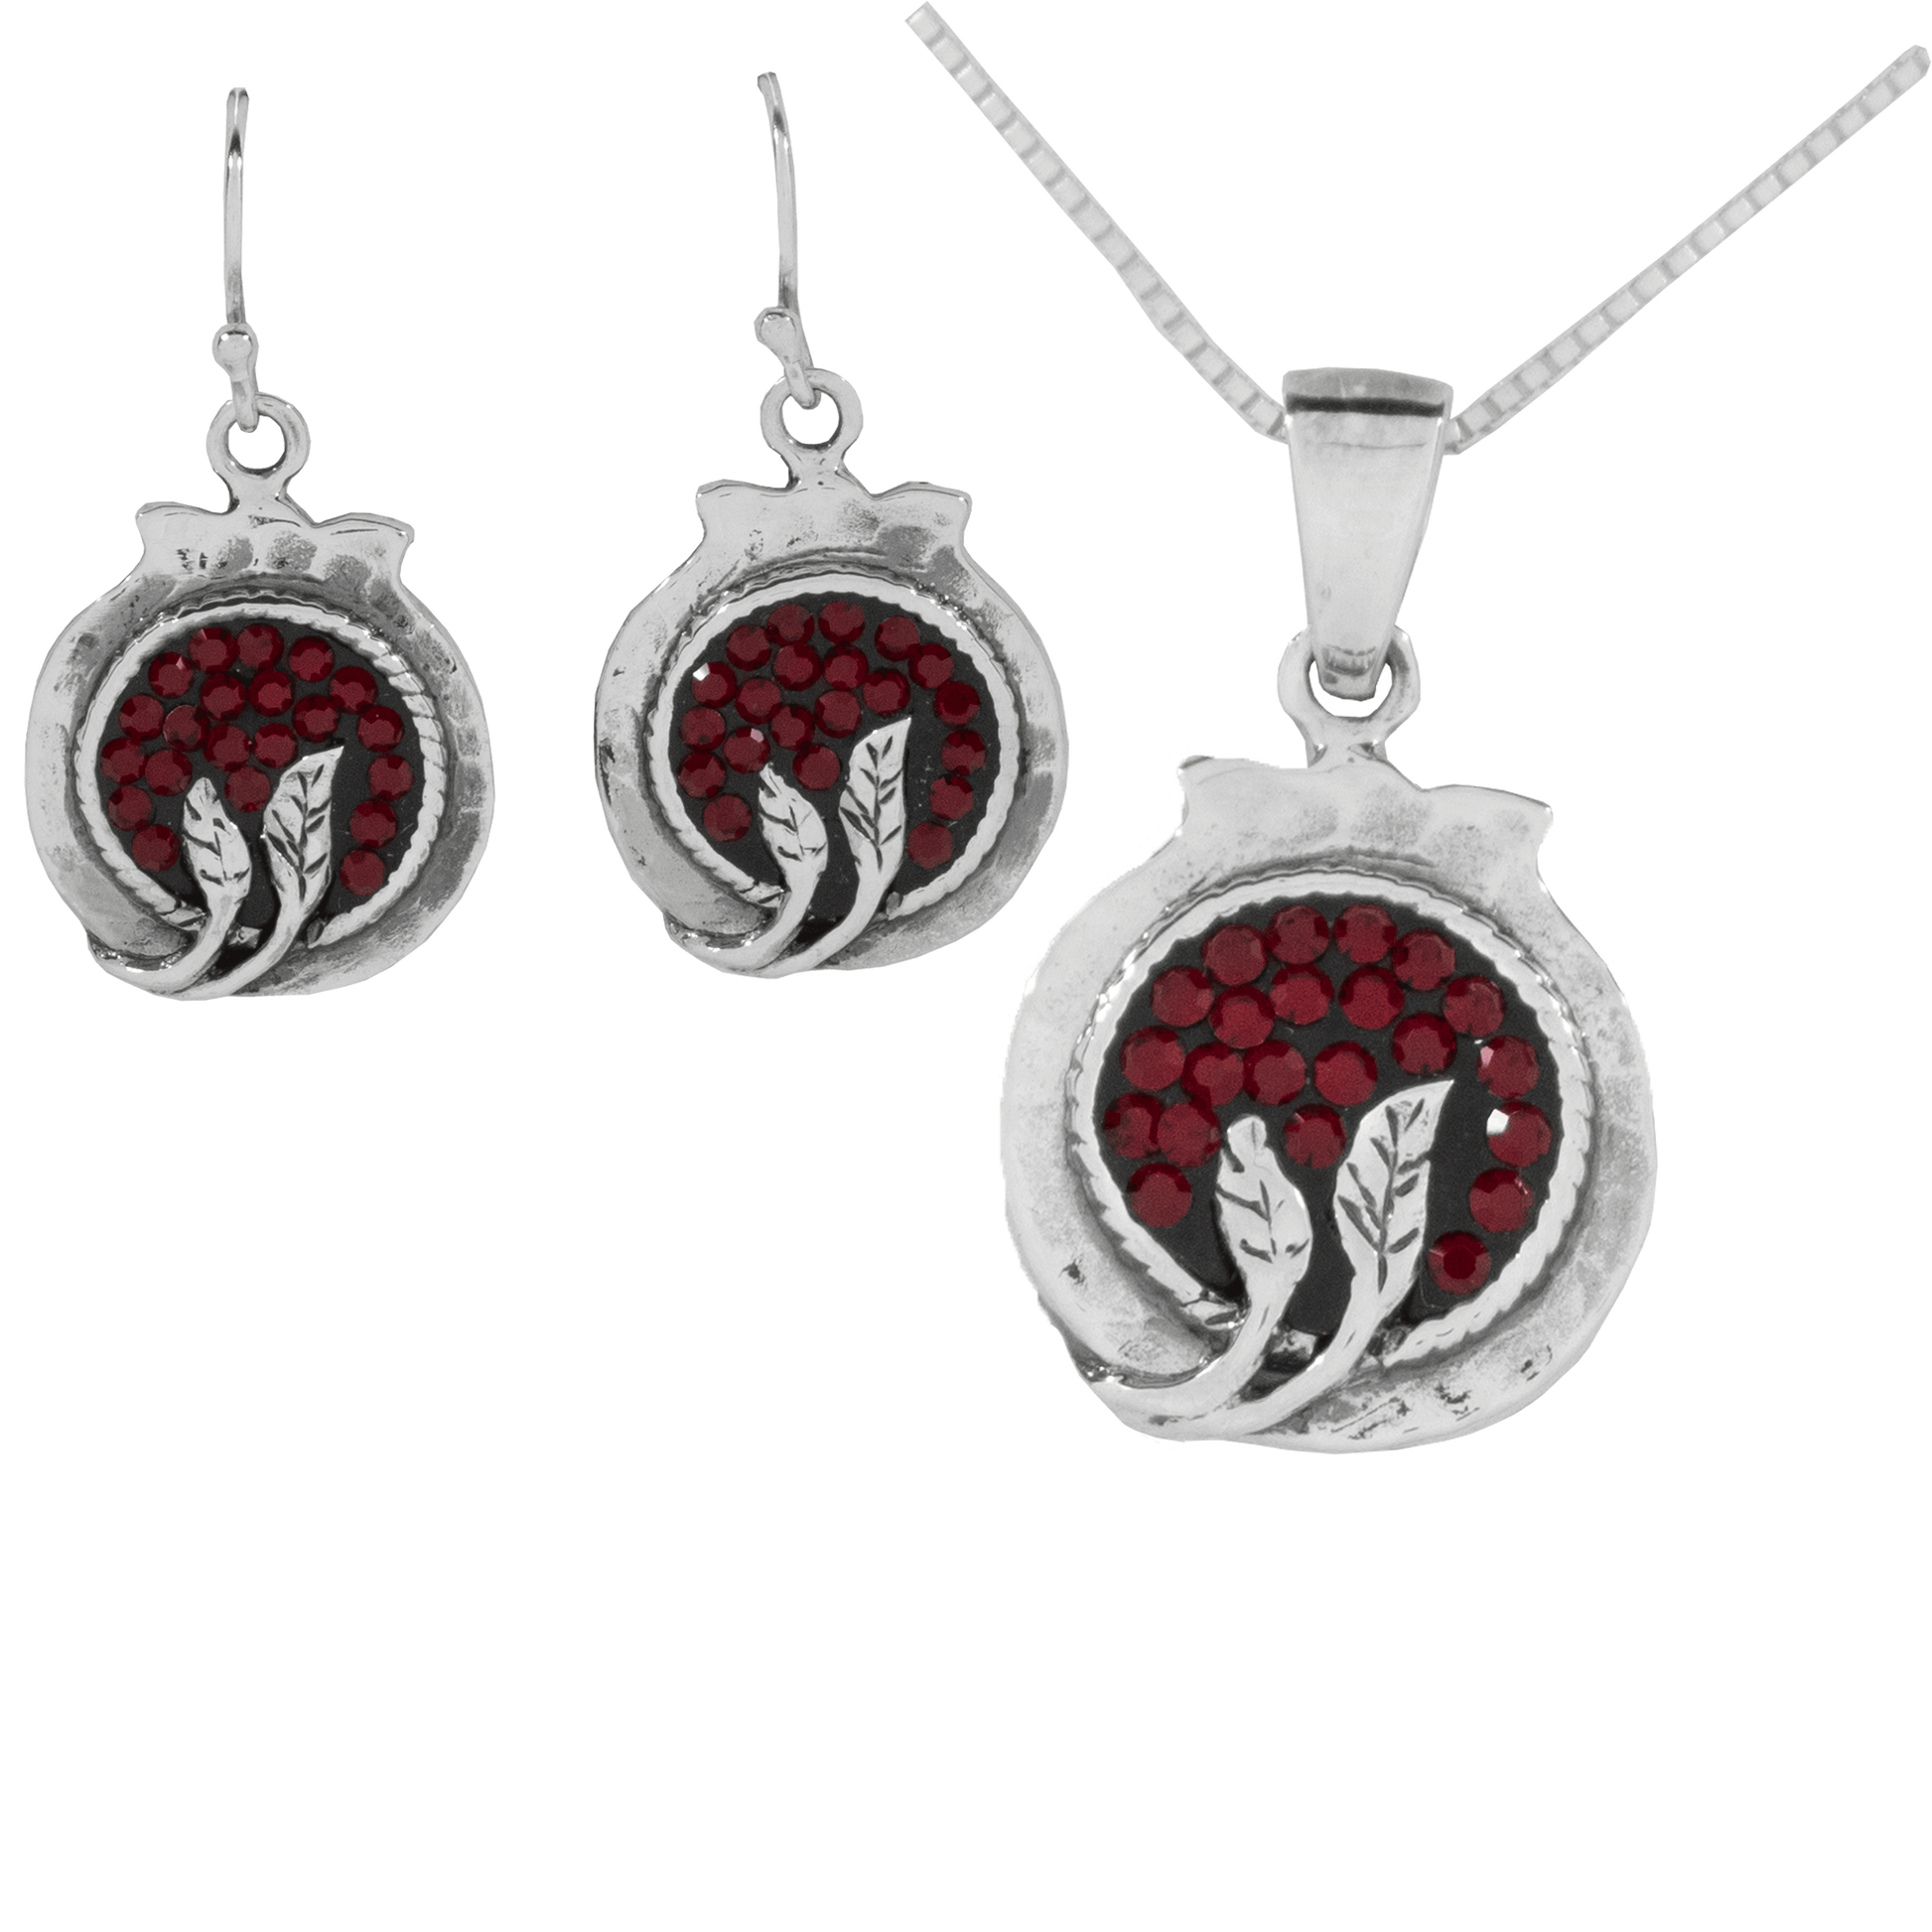 Sterling Silver Pomegranate Pendant and Earring Set with red Swaravski Crystals and decorative leaves at the bottom